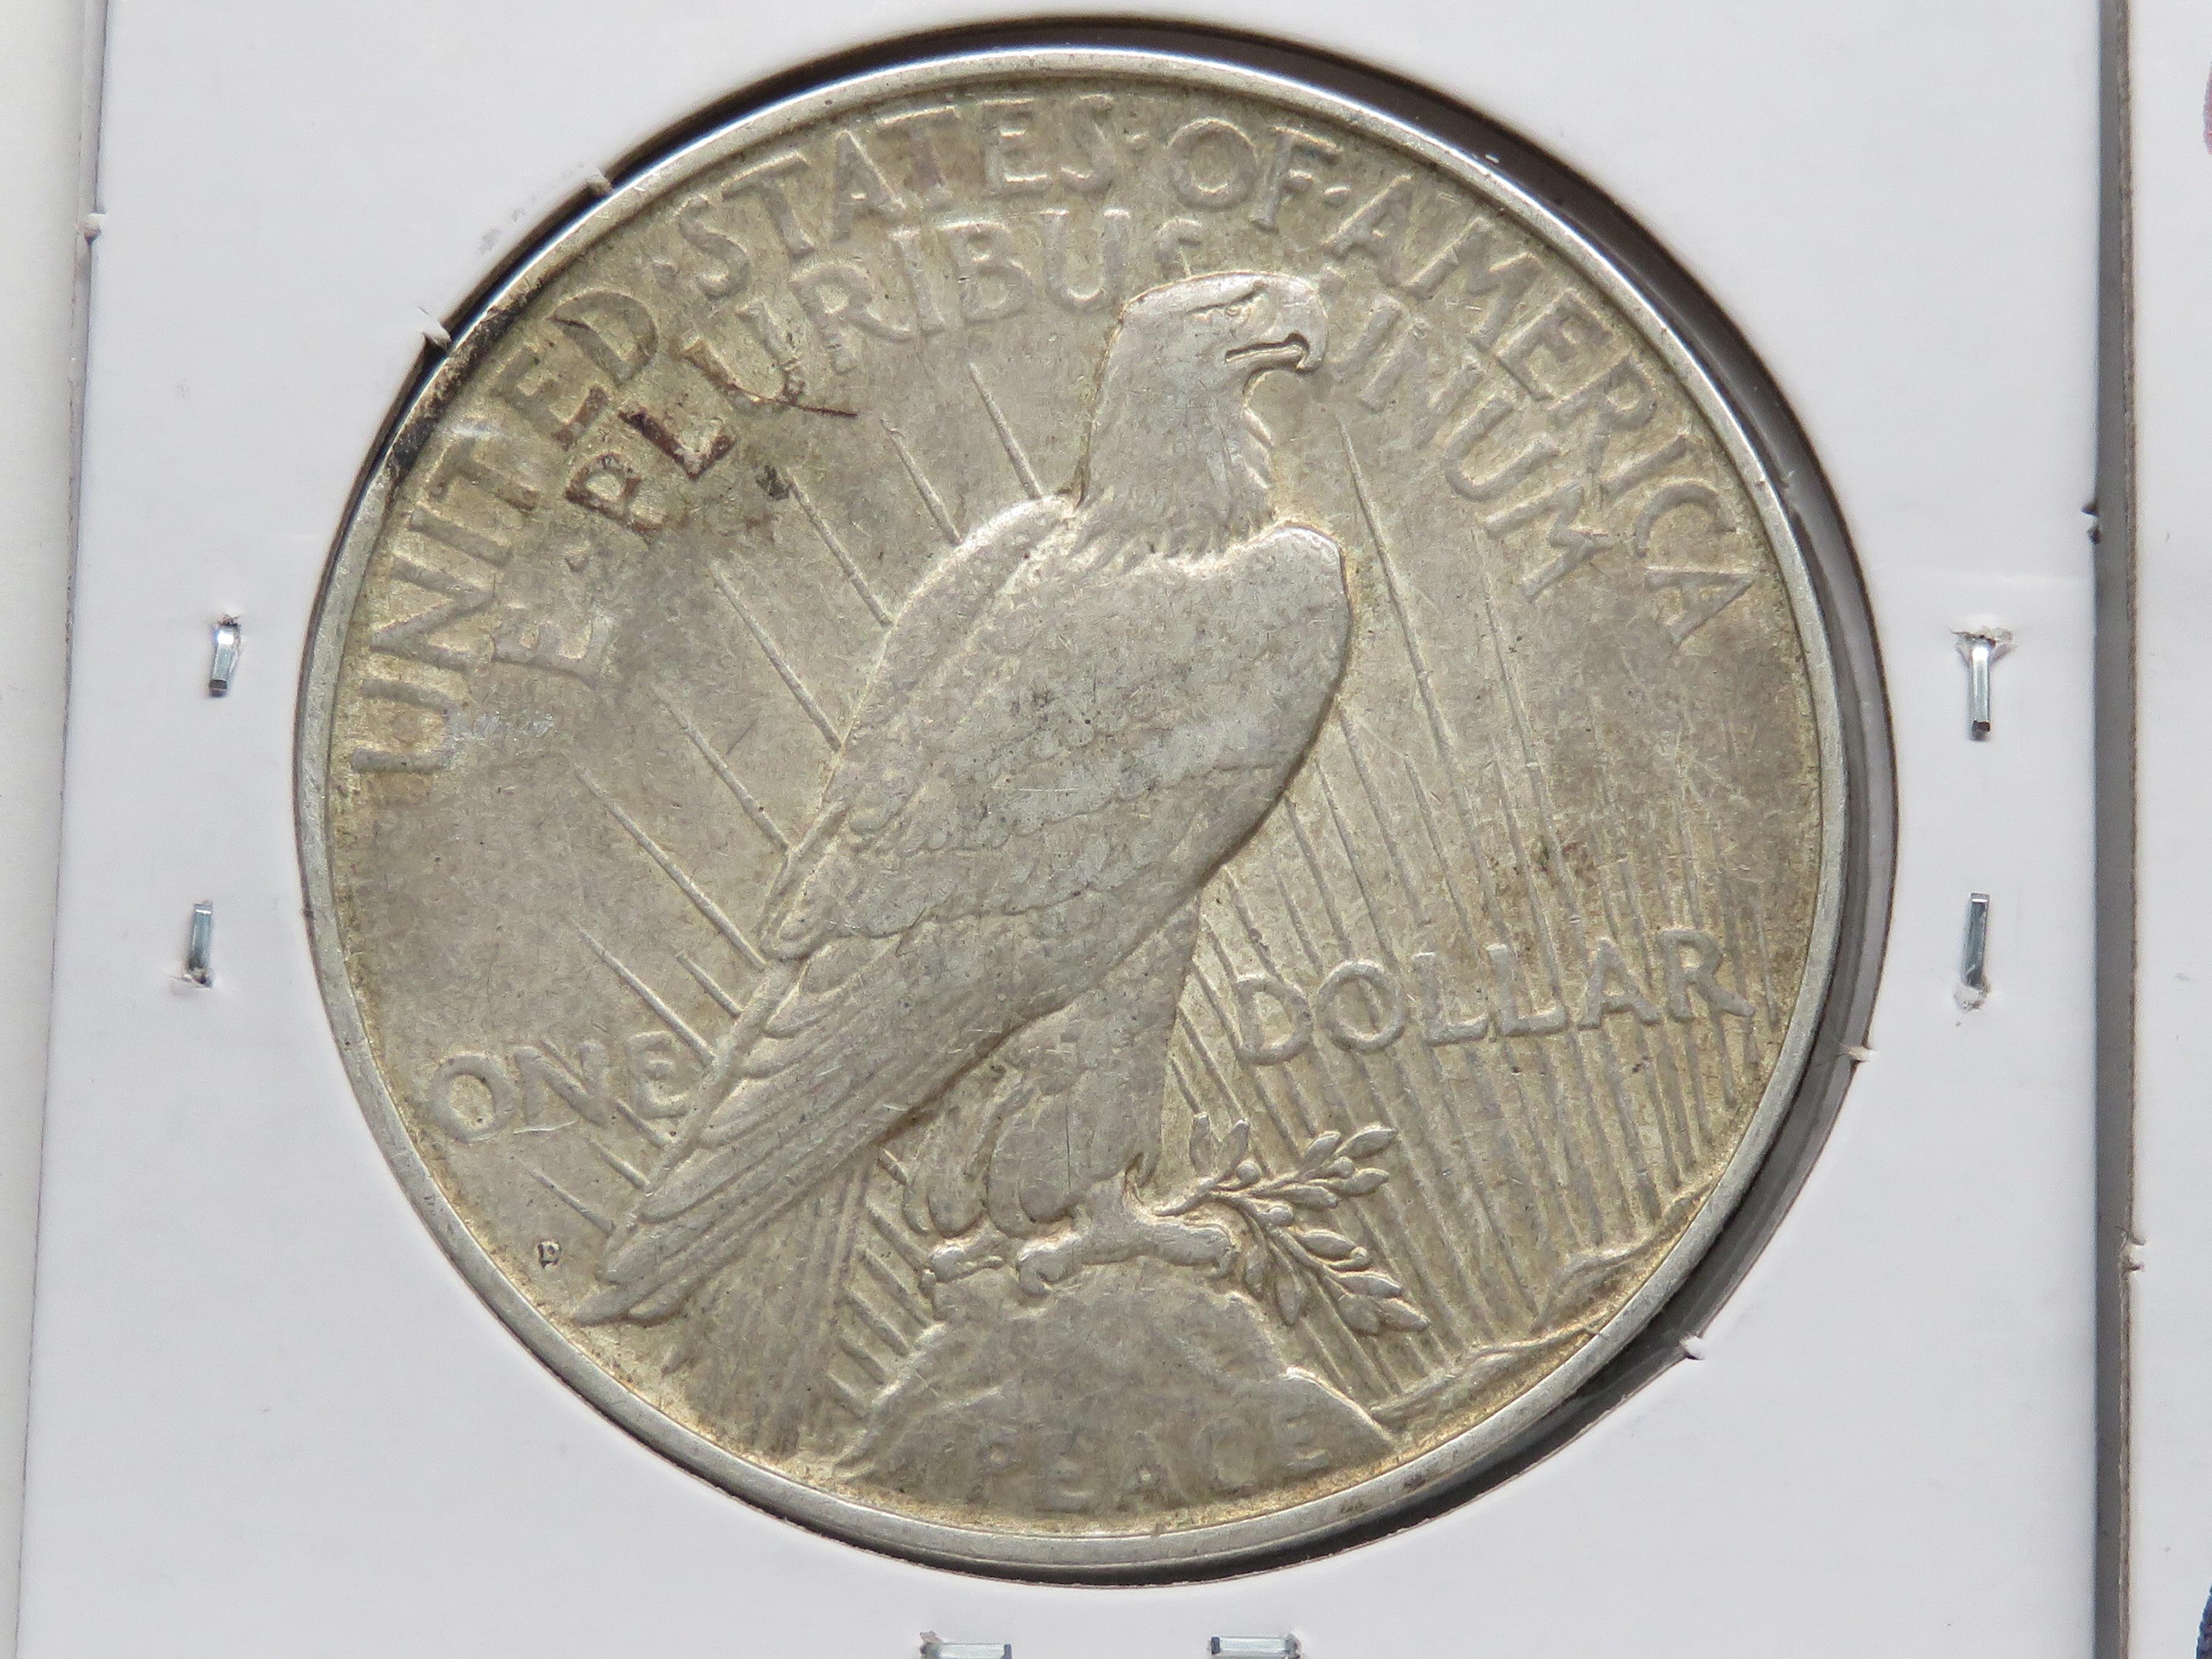 4 Peace $: 1922 F, 22 EF ?residue, 22D F, 22S F harshly cleaned